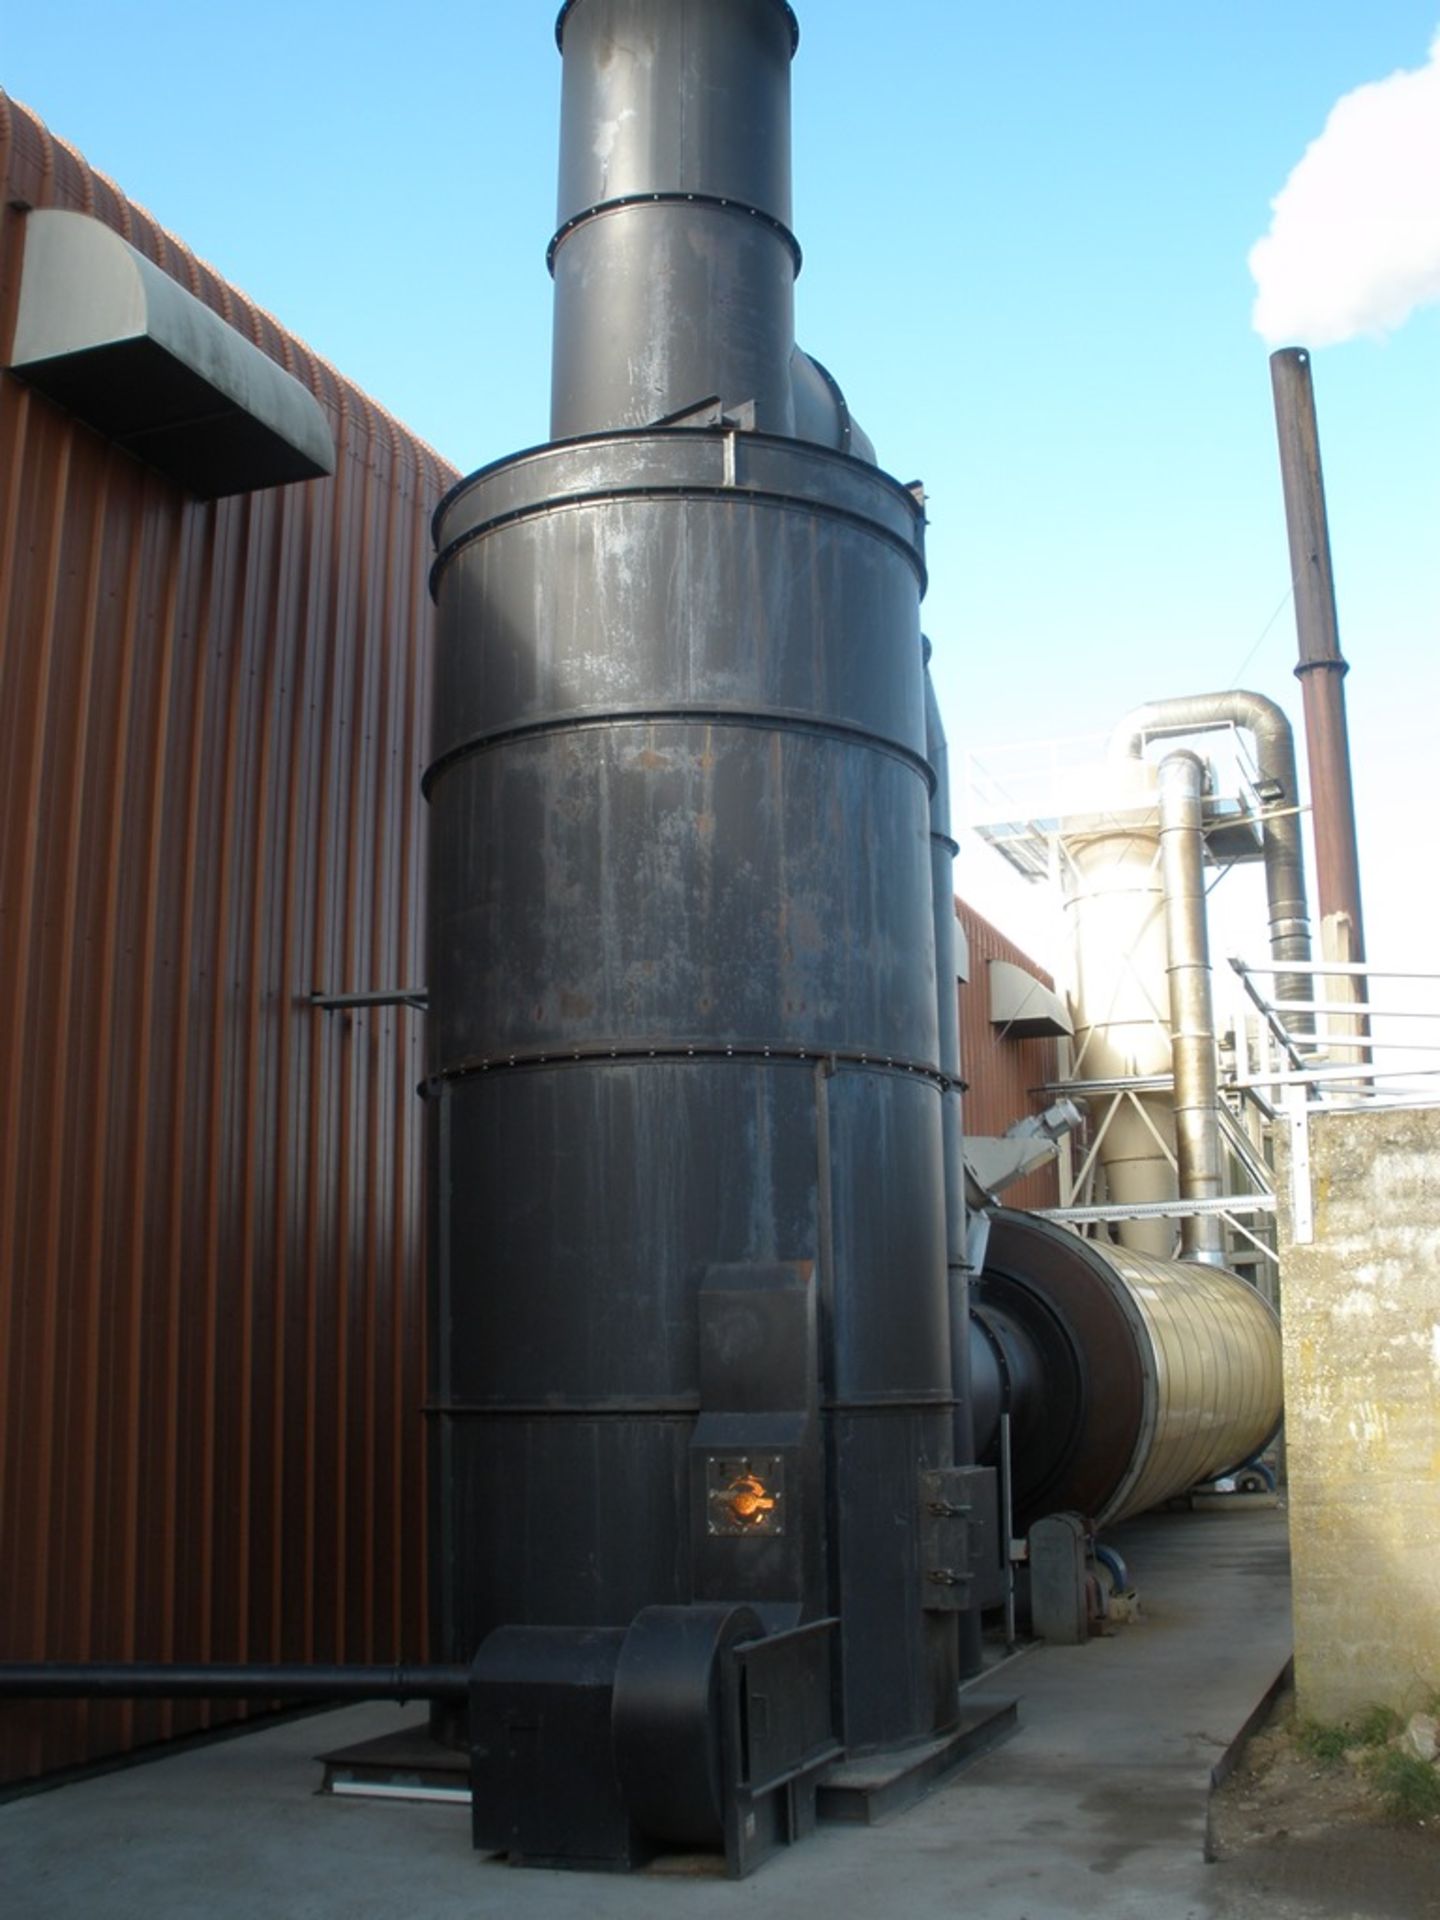 Furnace - Energy Unlimited Biomass Burner, believed built in 2008. It has an output of 5MW - Bild 4 aus 5